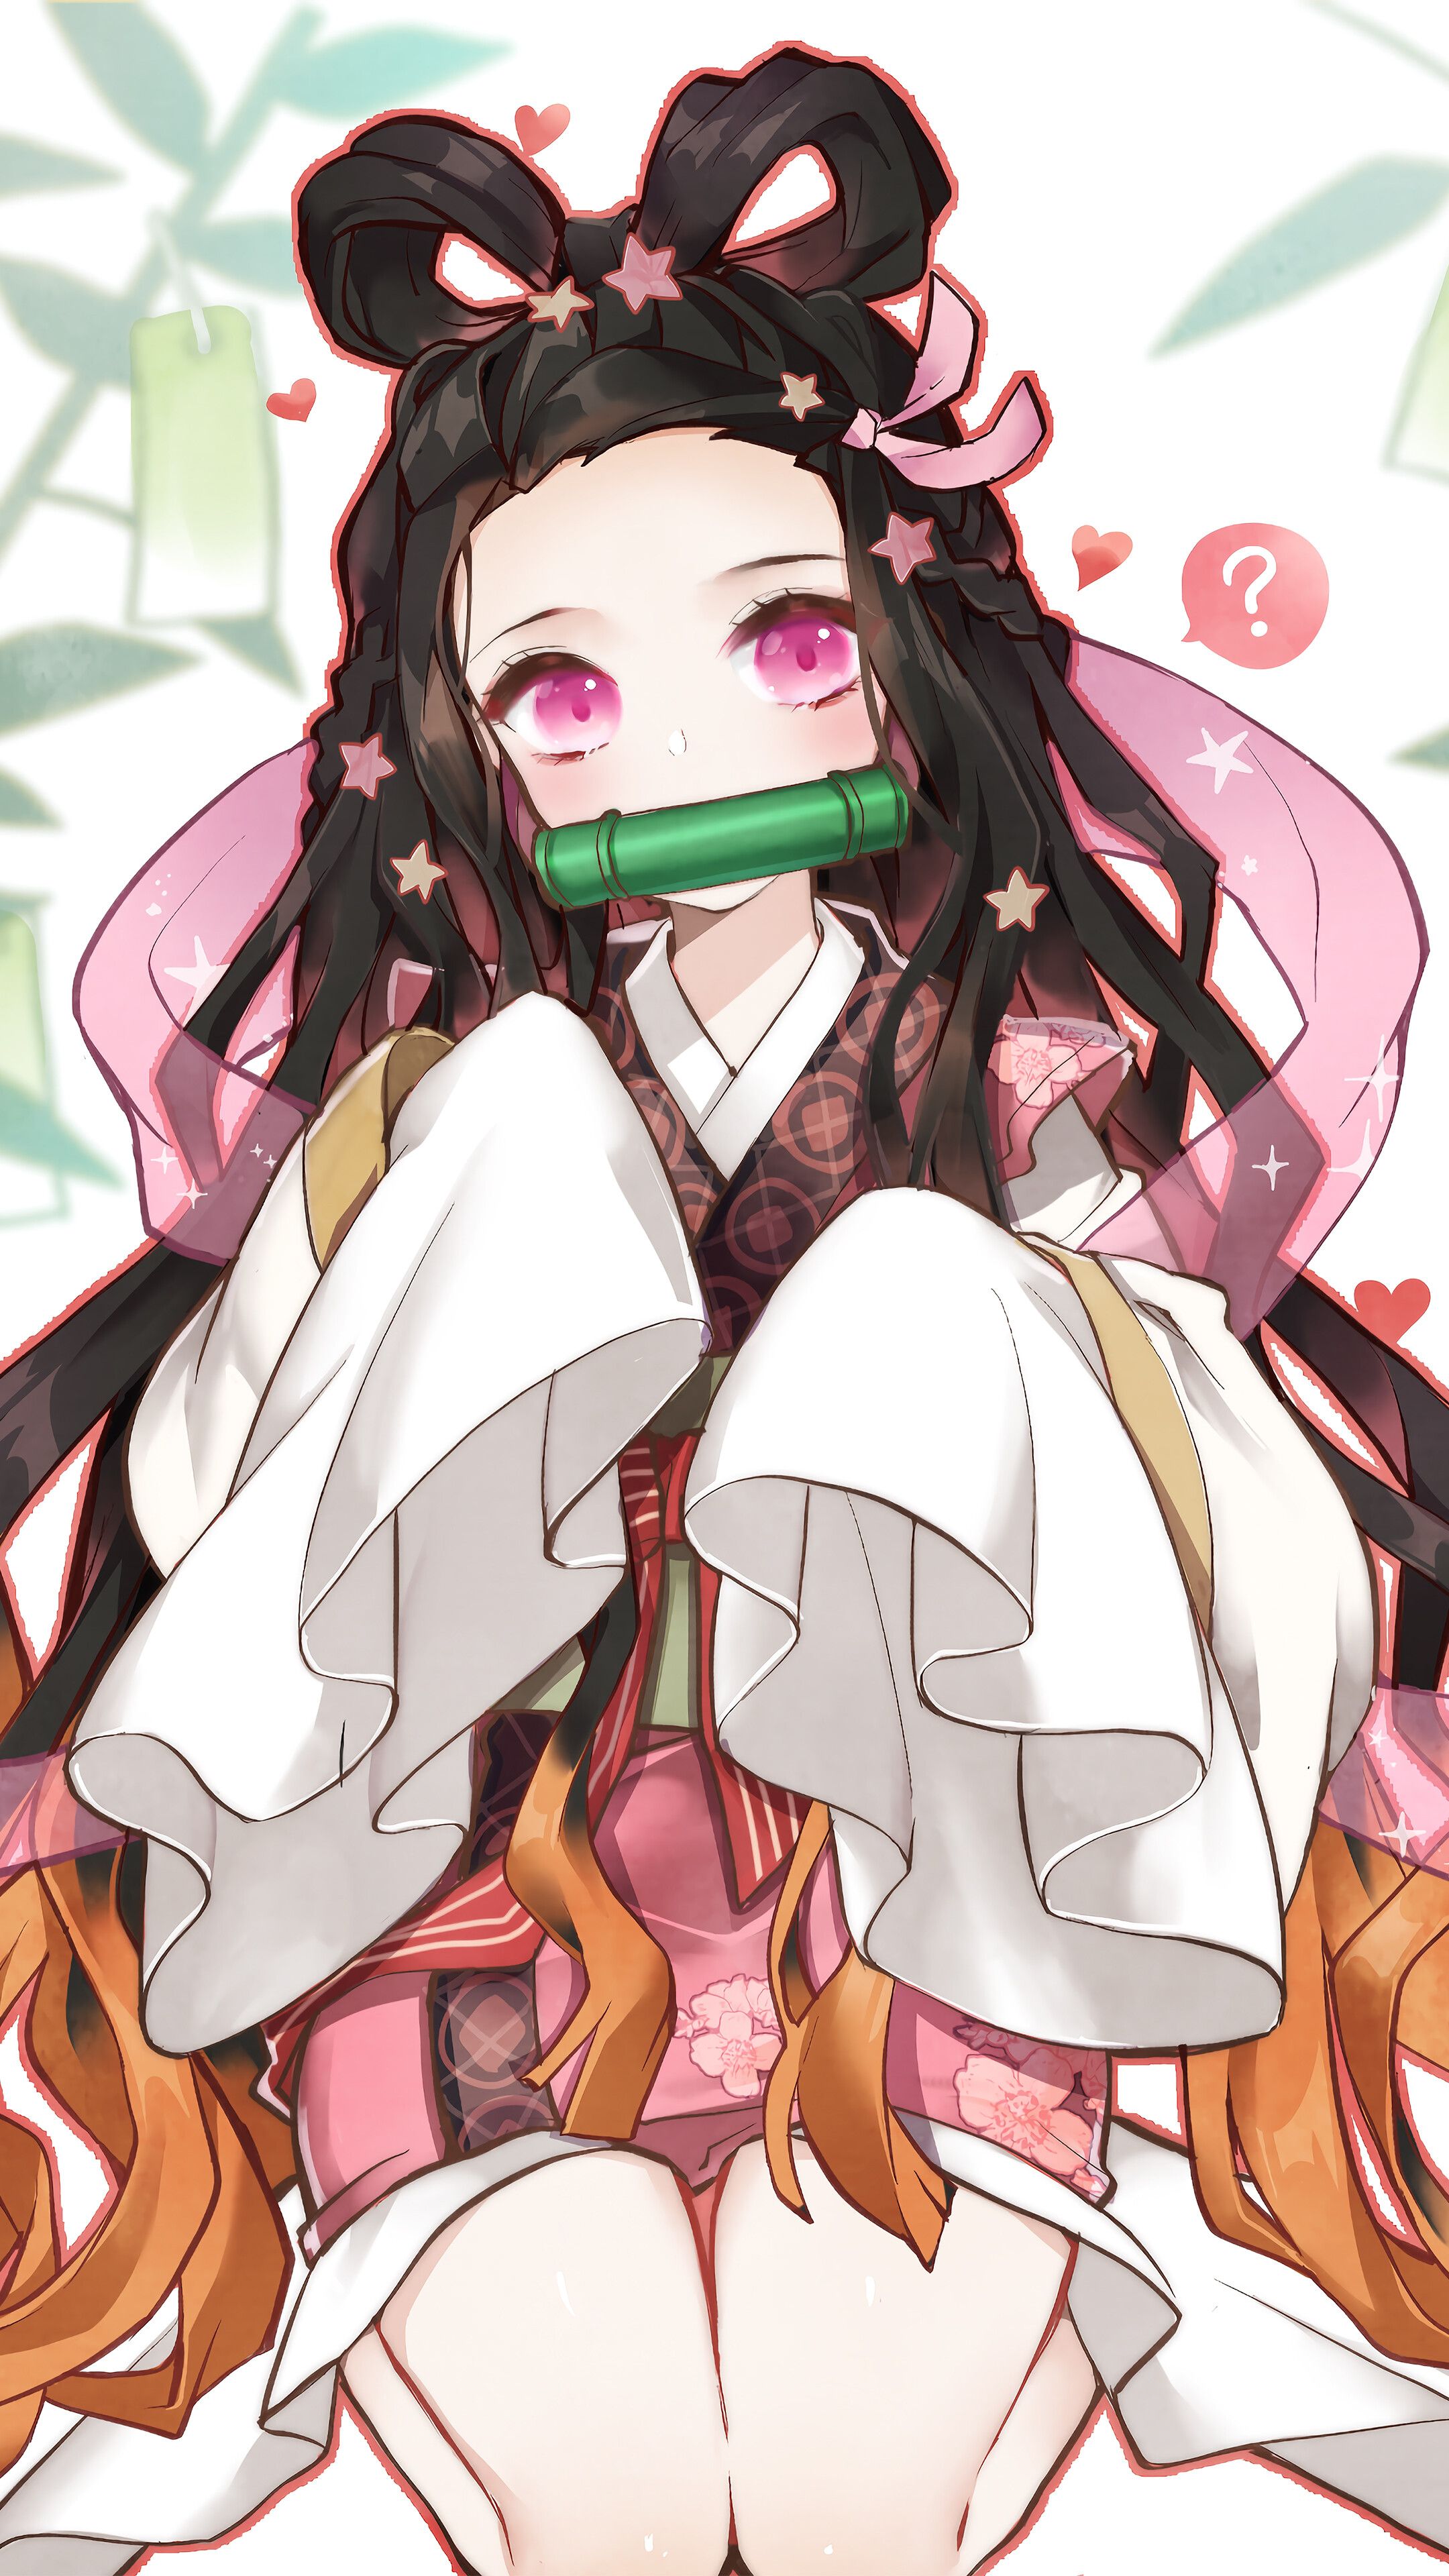 Anime girl with long black hair and a pink bow on her head - Nezuko